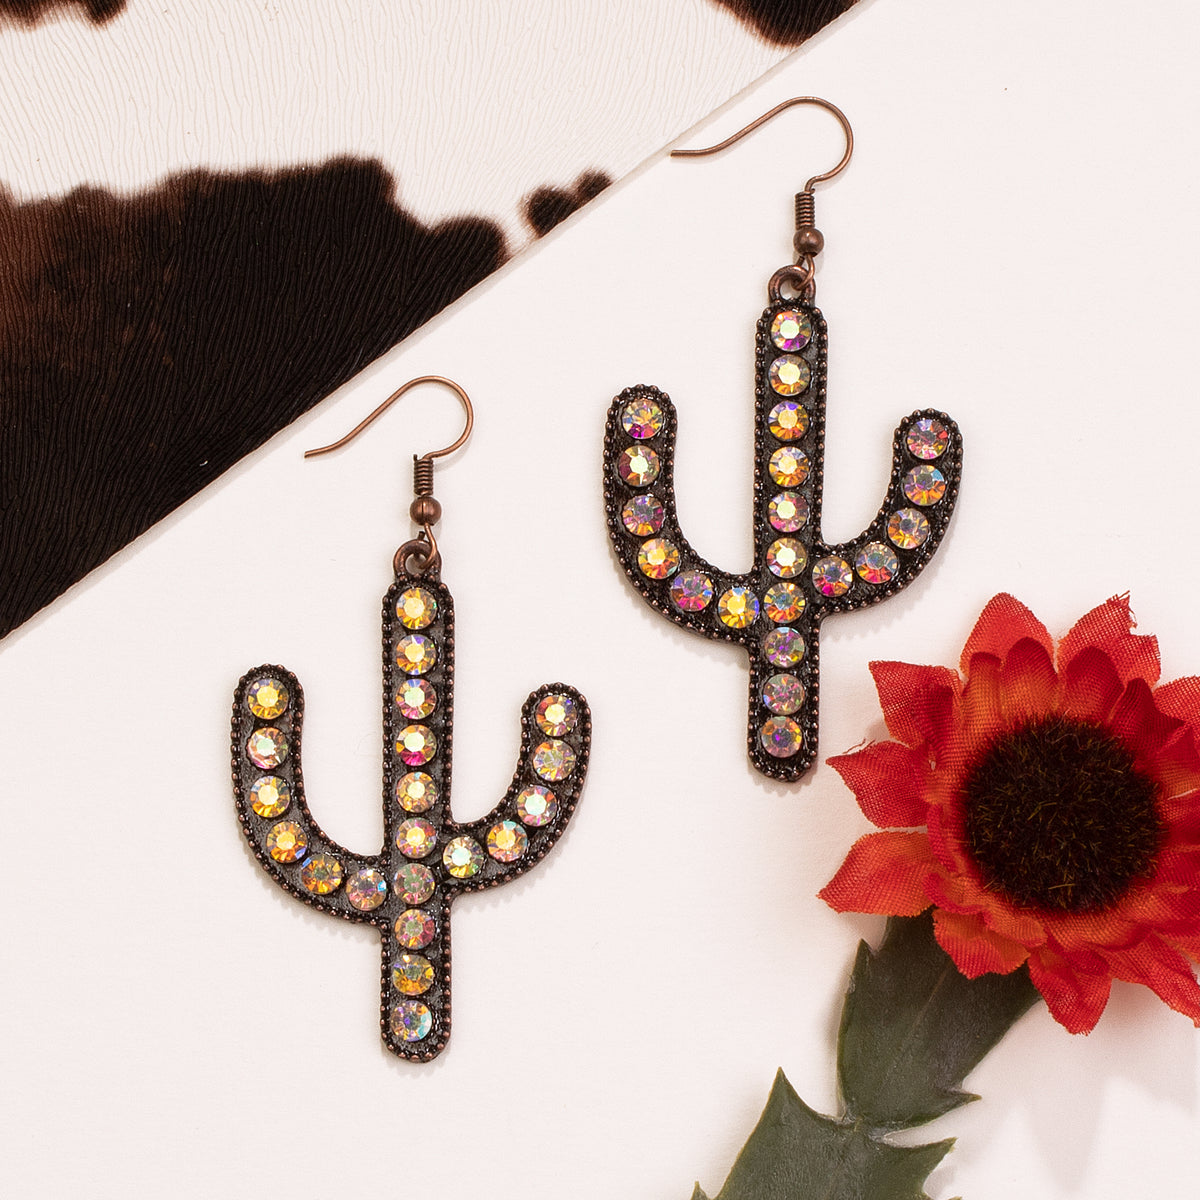 73529 - Crystal Cactus Earrings - Copper & AB - Fashion Jewelry Wholesale